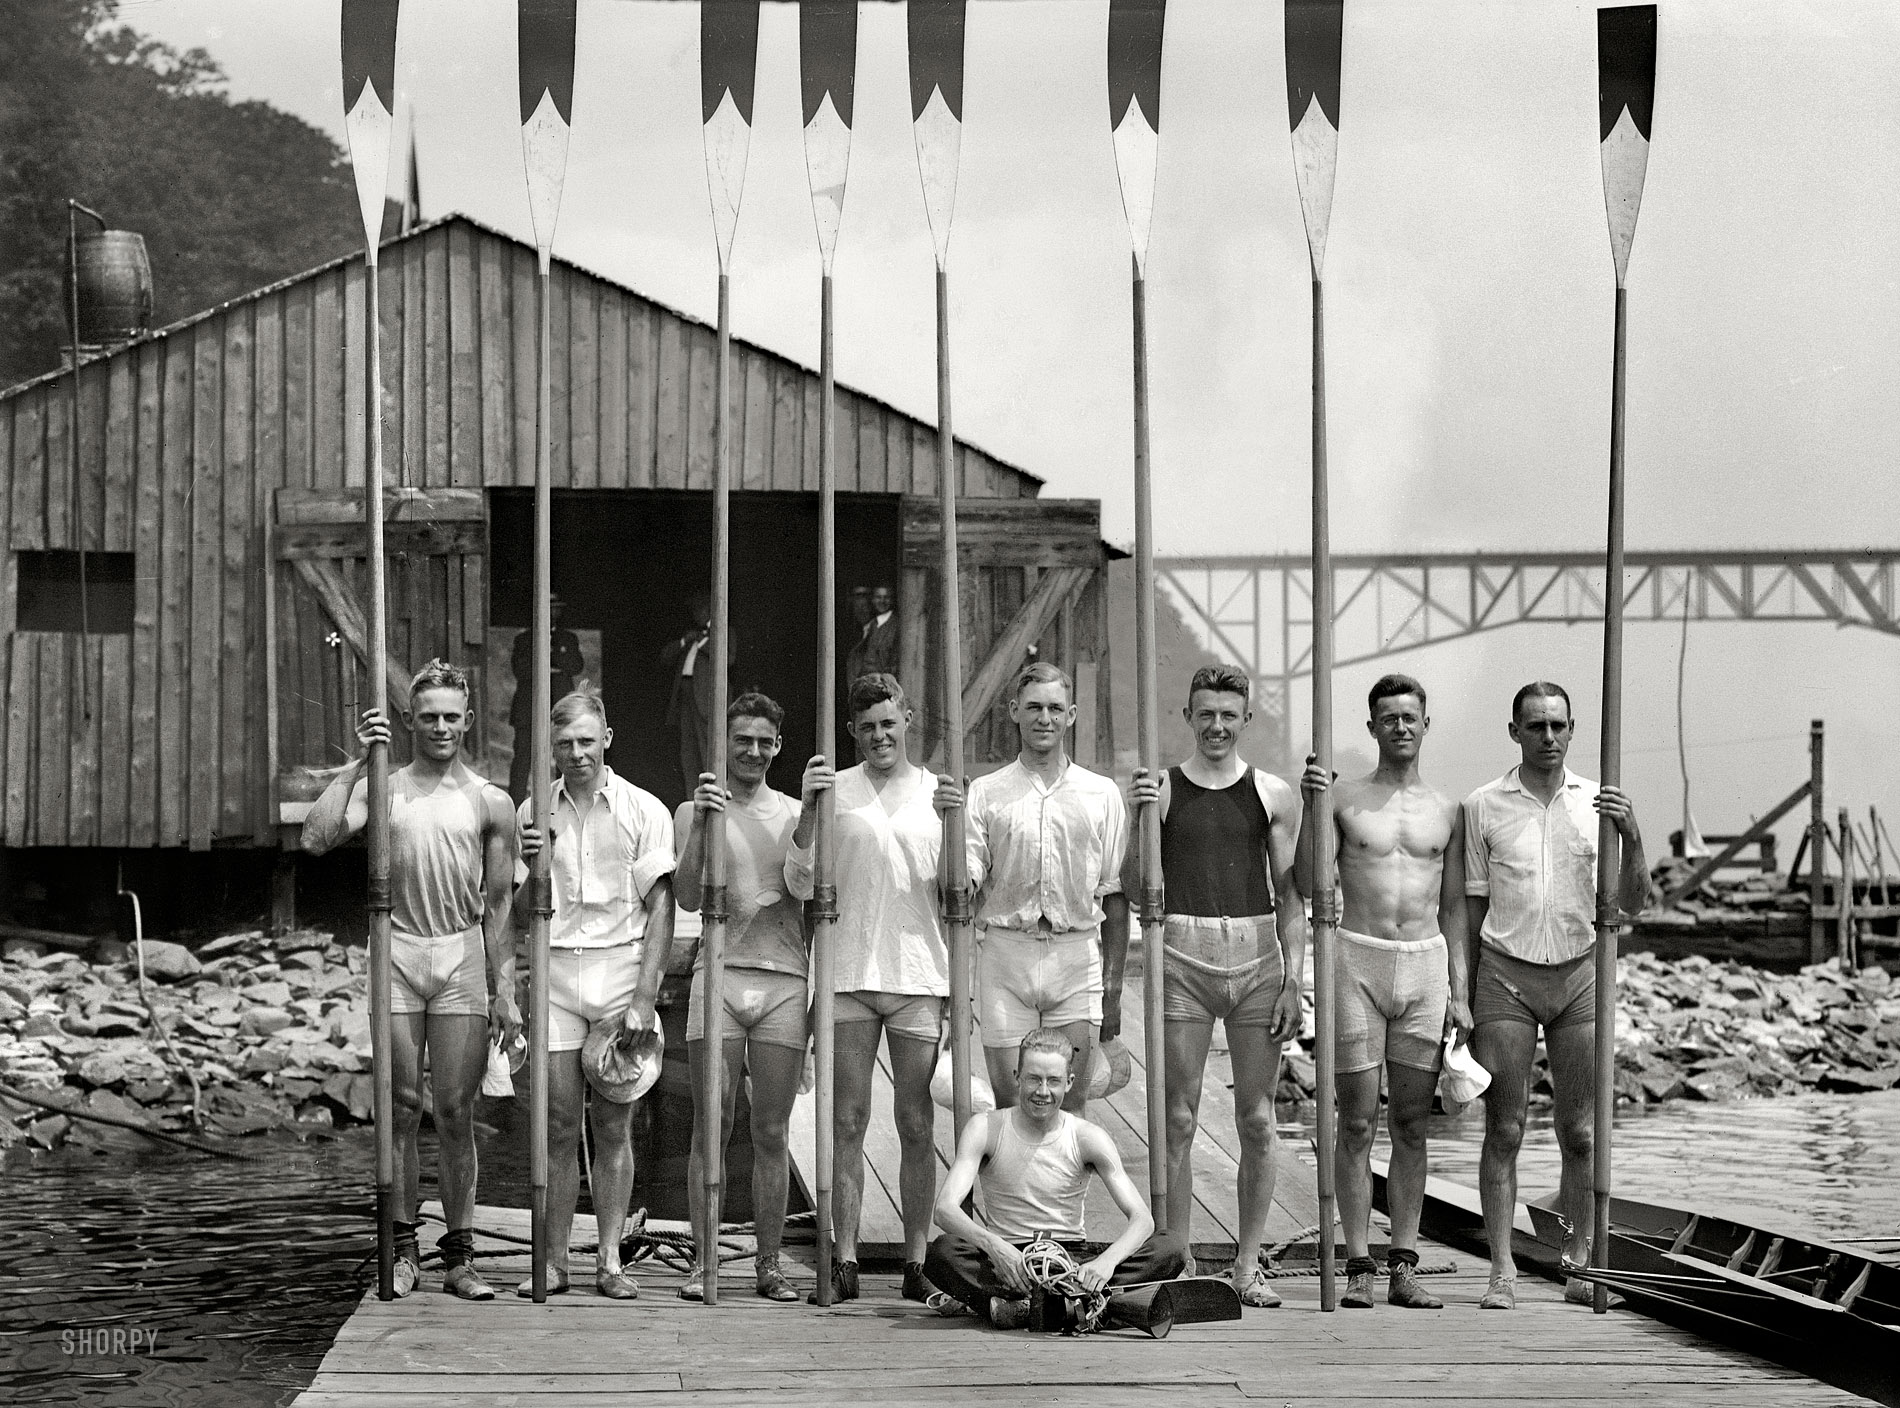 June 1914. Poughkeepsie, New York. "Cornell 2nd Varsity." Let's all pull together, men! College rowers on the Hudson in the heyday of the Poughkeepsie Regatta. 5x7 glass negative, George Grantham Bain Collection. View full size.